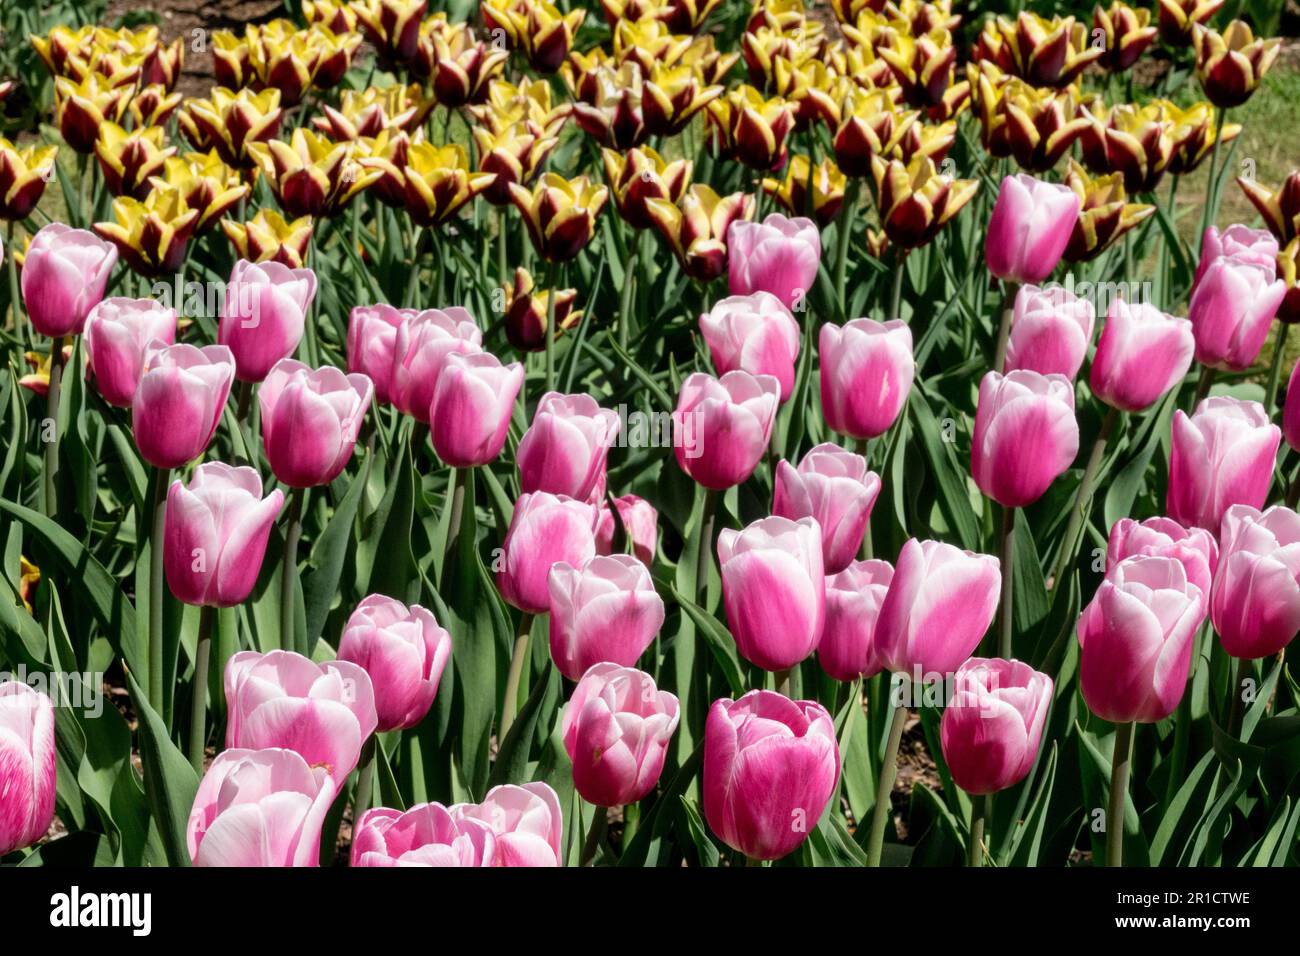 Pink, Yellow, Dark Red, White, Multicolour, Tulips, Spring, Bed, Garden Stock Photo